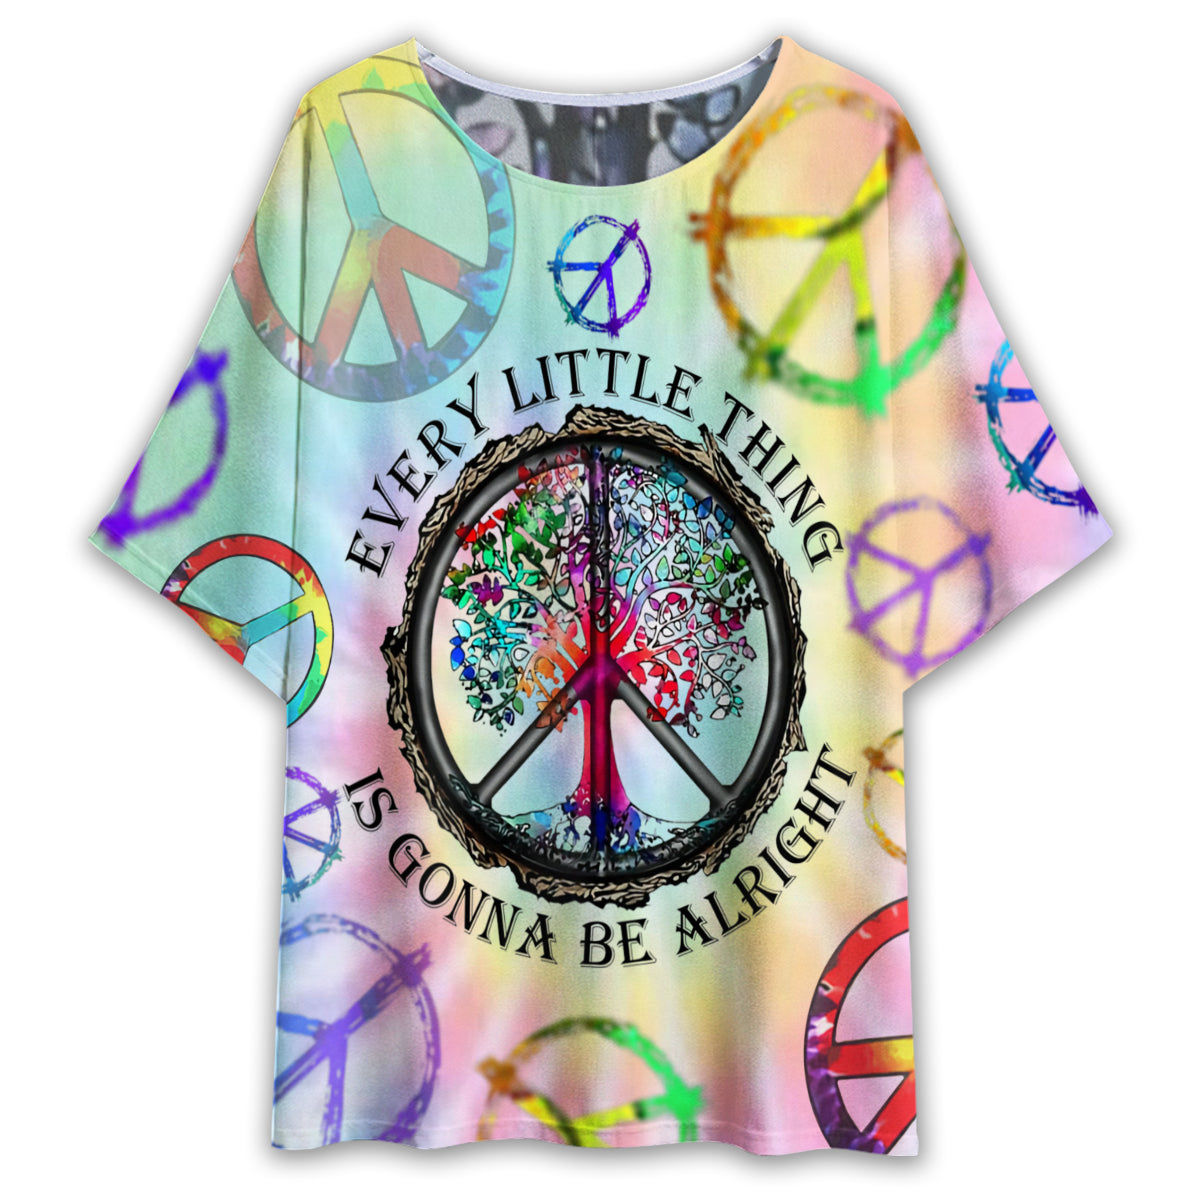 S Hippie Every Little Thing Is Gonna Be Alright - Women's T-shirt With Bat Sleeve - Owls Matrix LTD